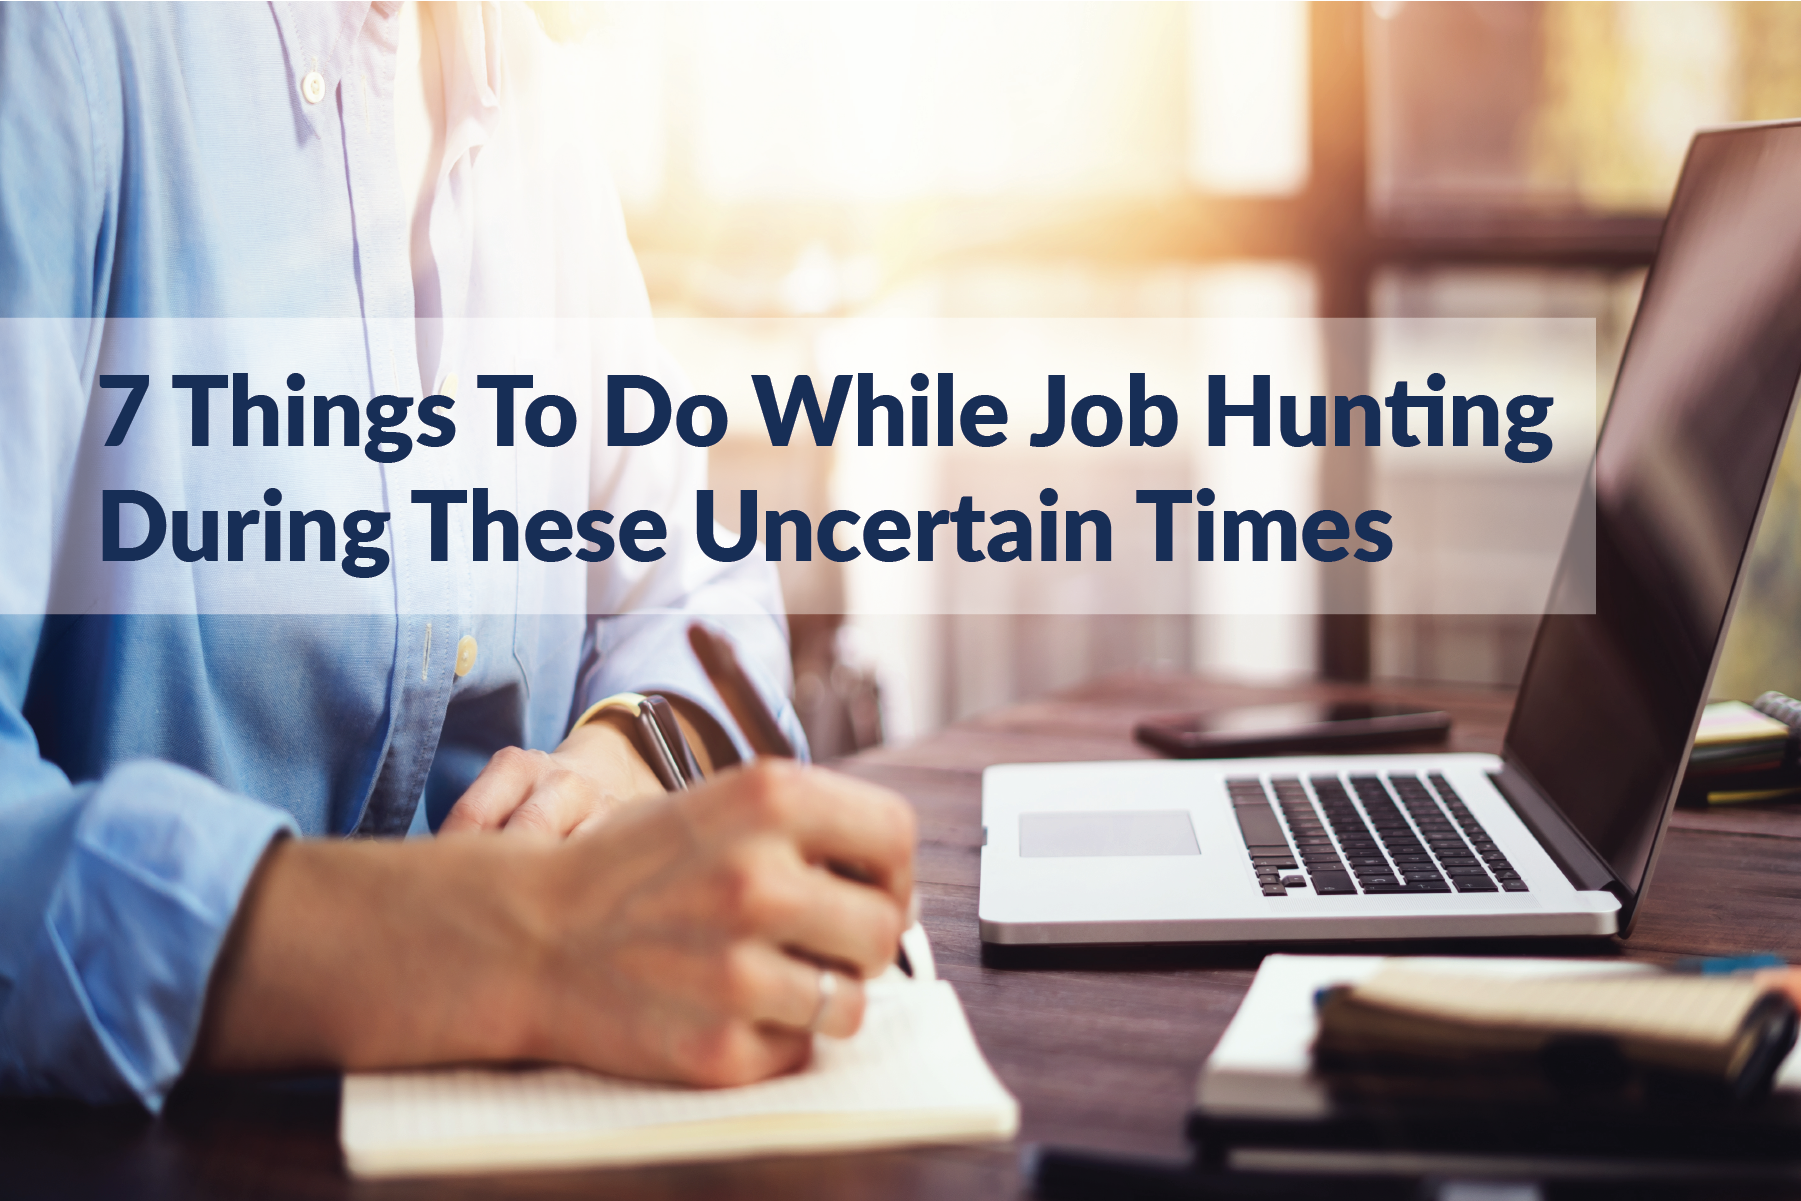 7 Things To Do While Job Hunting During These Uncertain Times